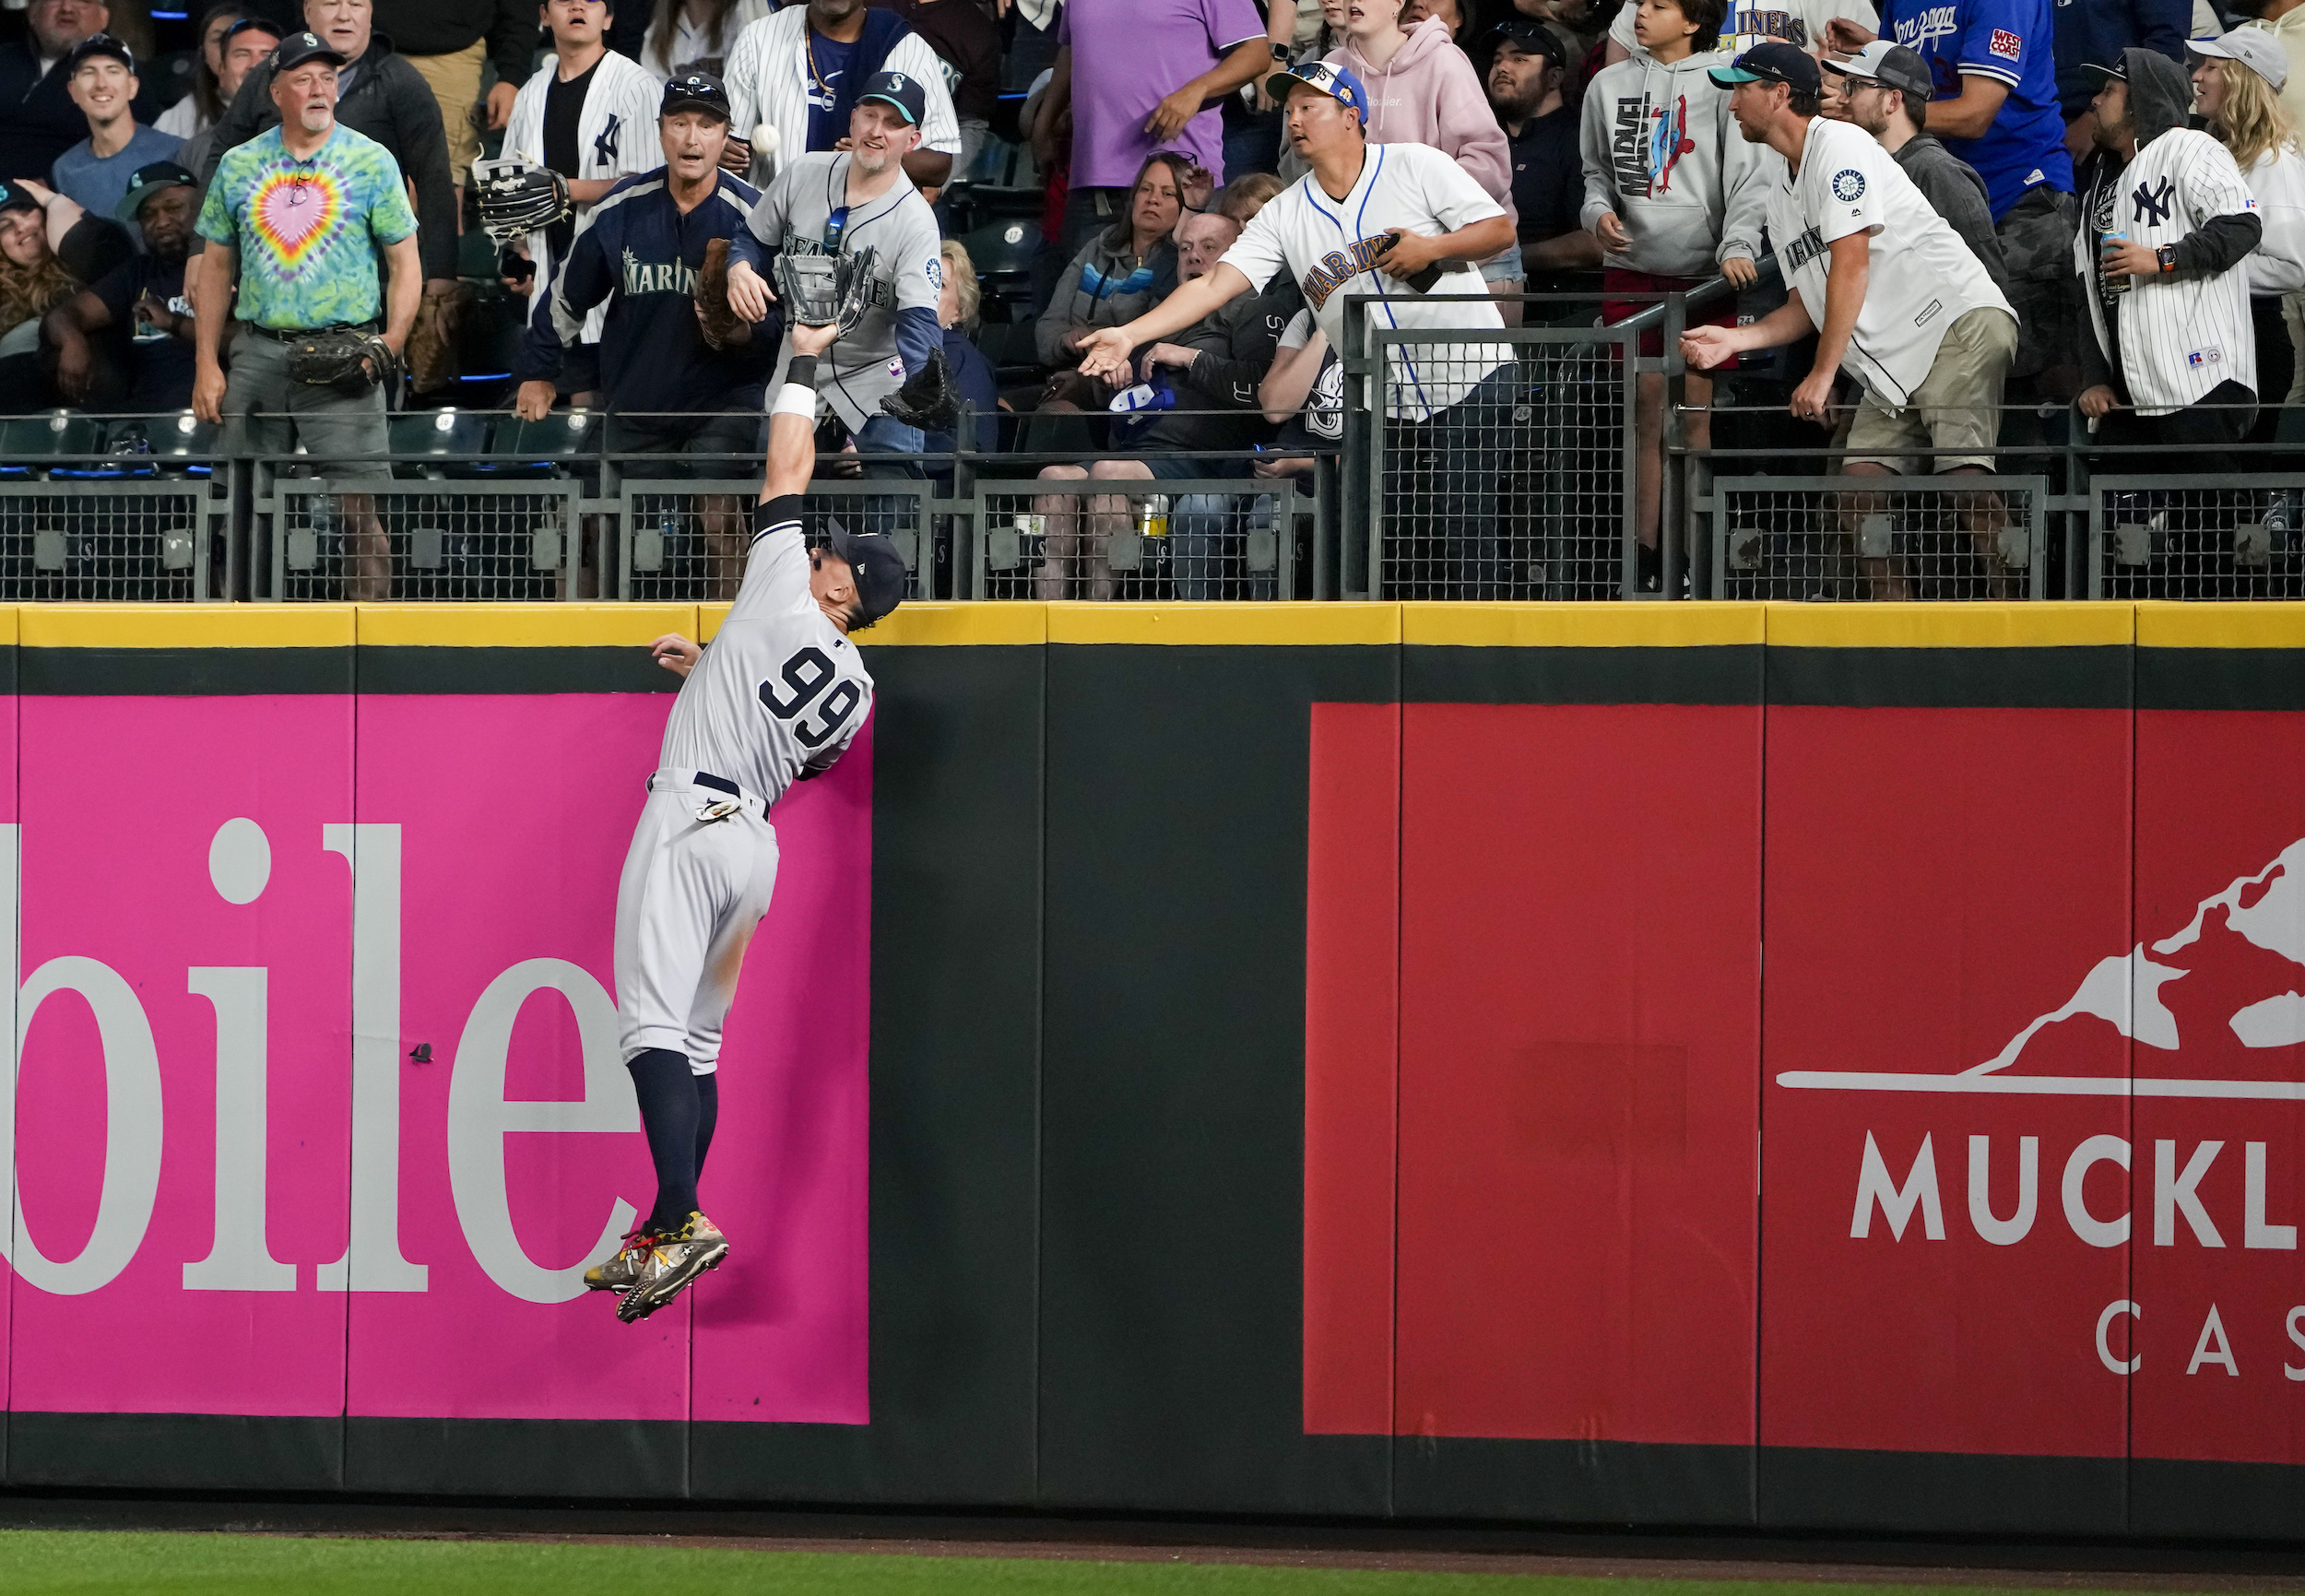 Aaron Judge's Insane Fence-busting Catch Ends Dodgers' Rally